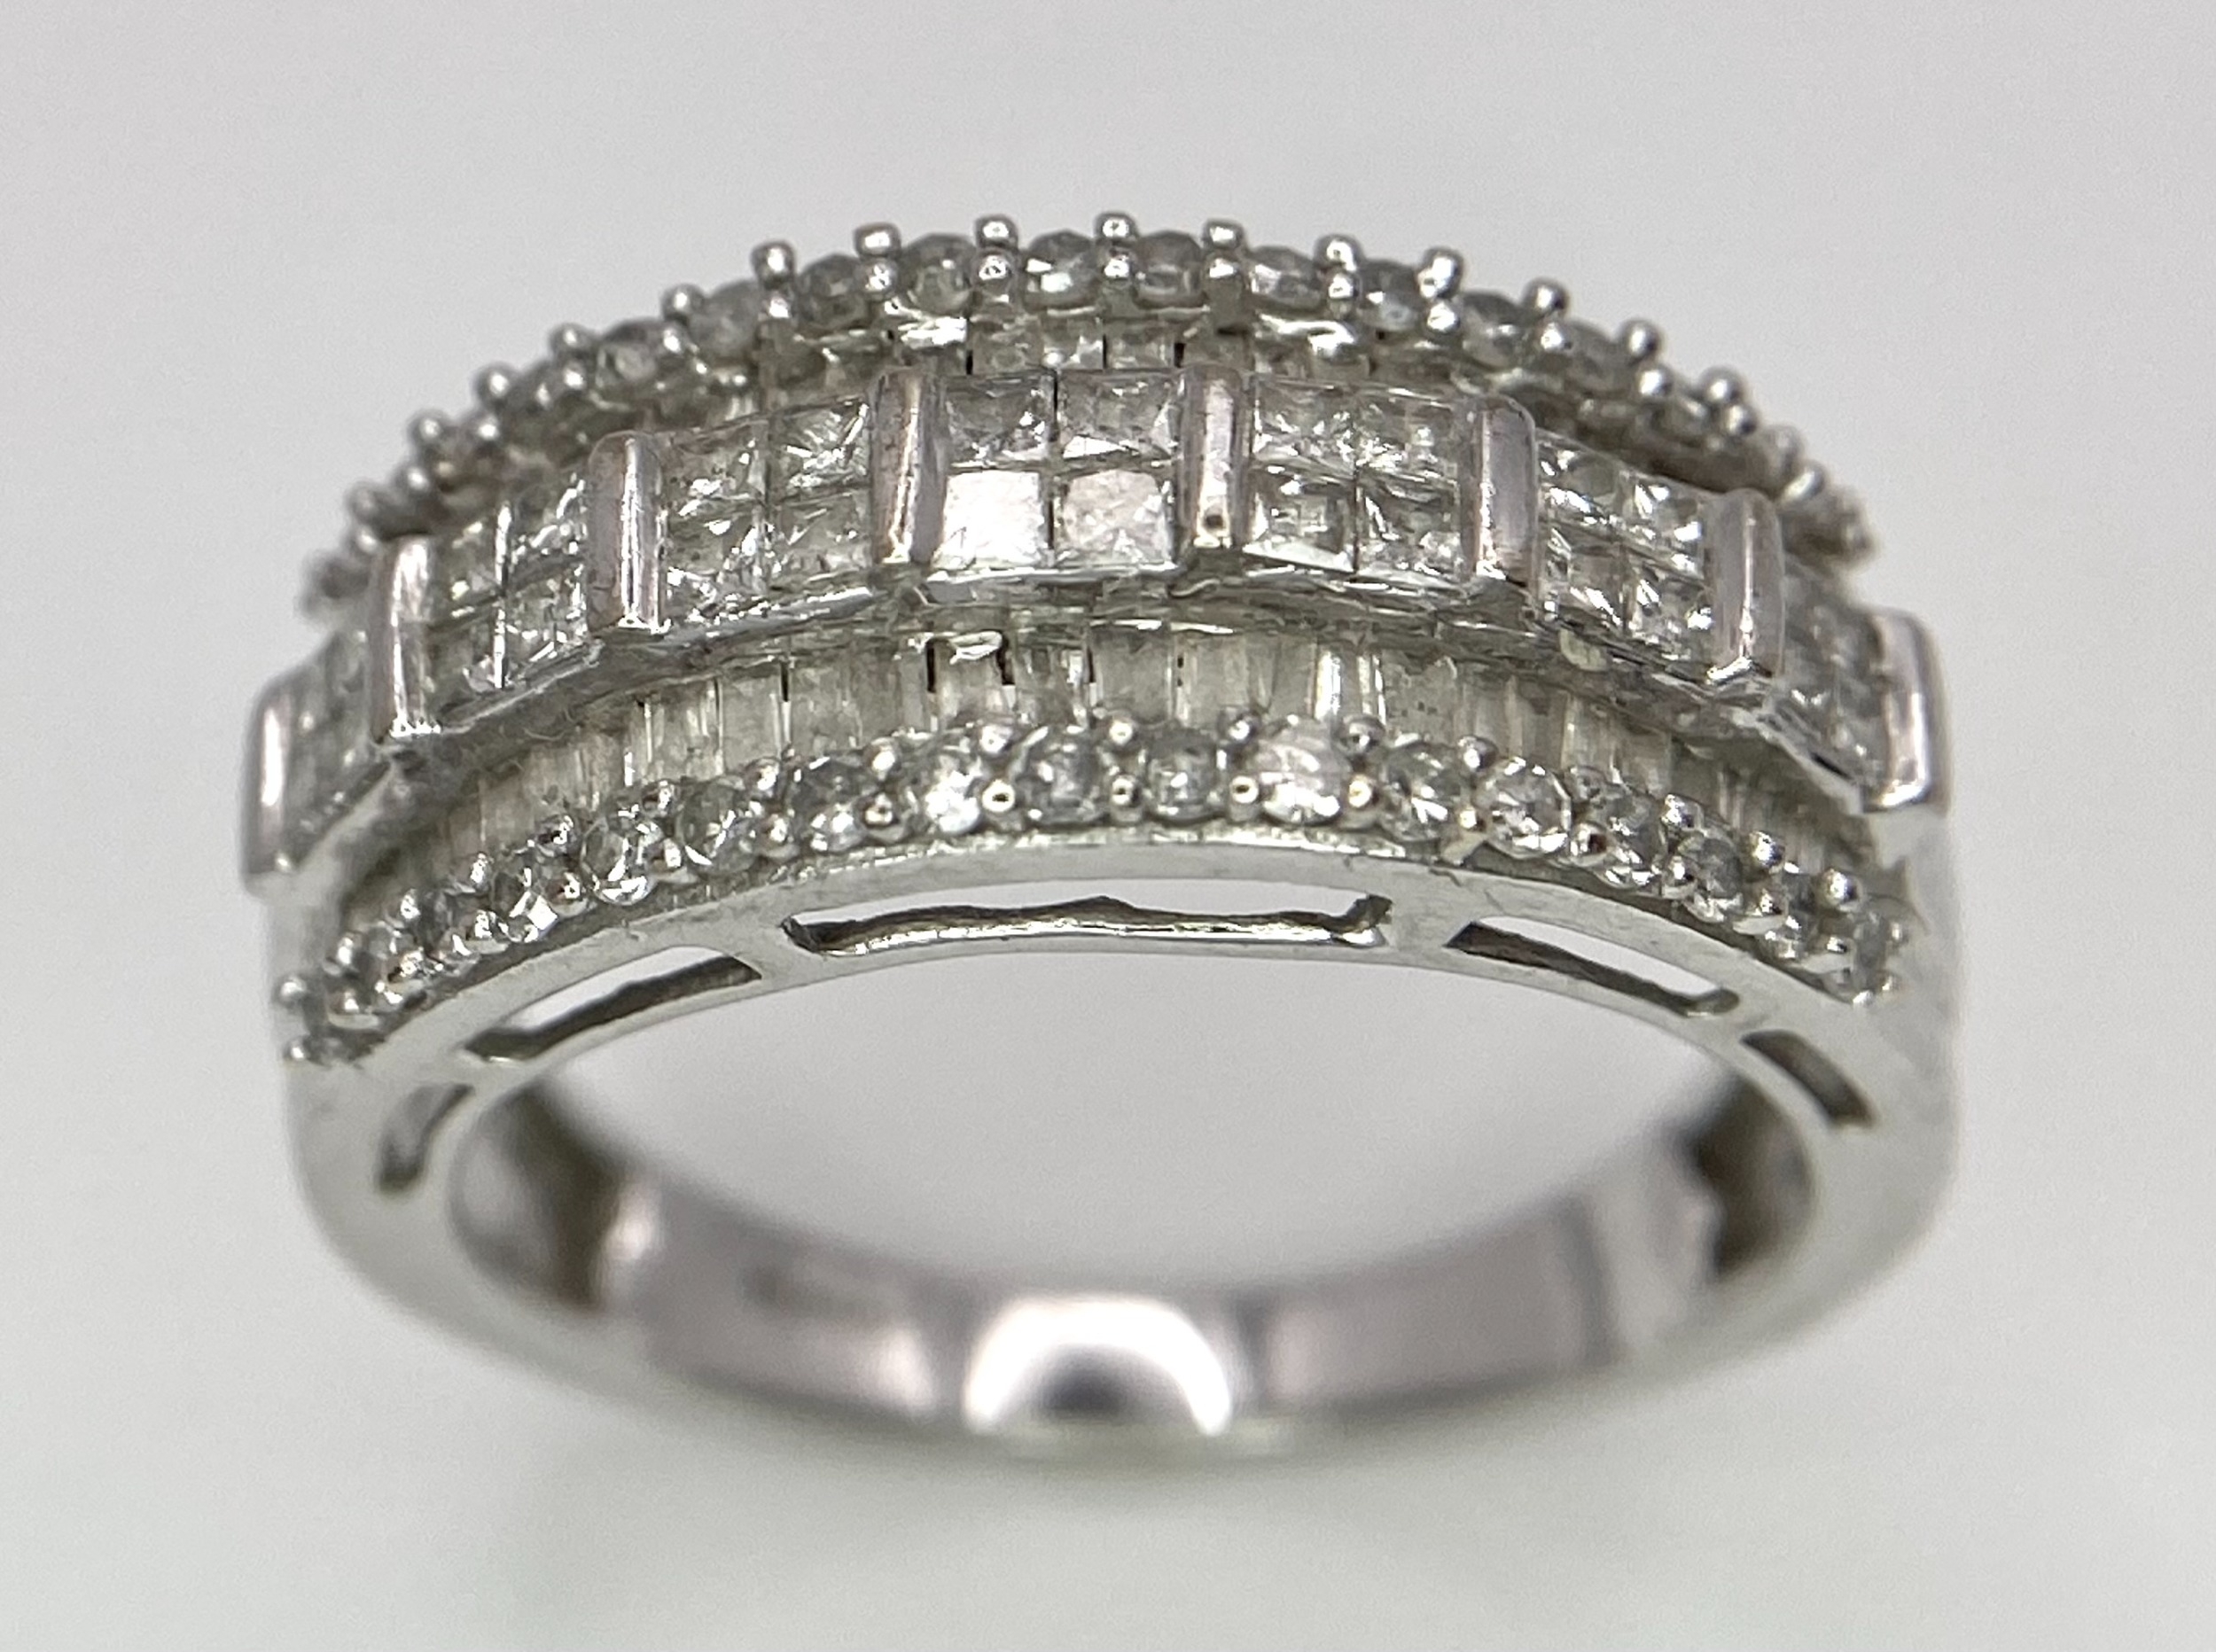 A 9K White Gold Mixed Cut Diamond Ring. Five rows of, square, round and baguette cut diamonds. - Image 3 of 7